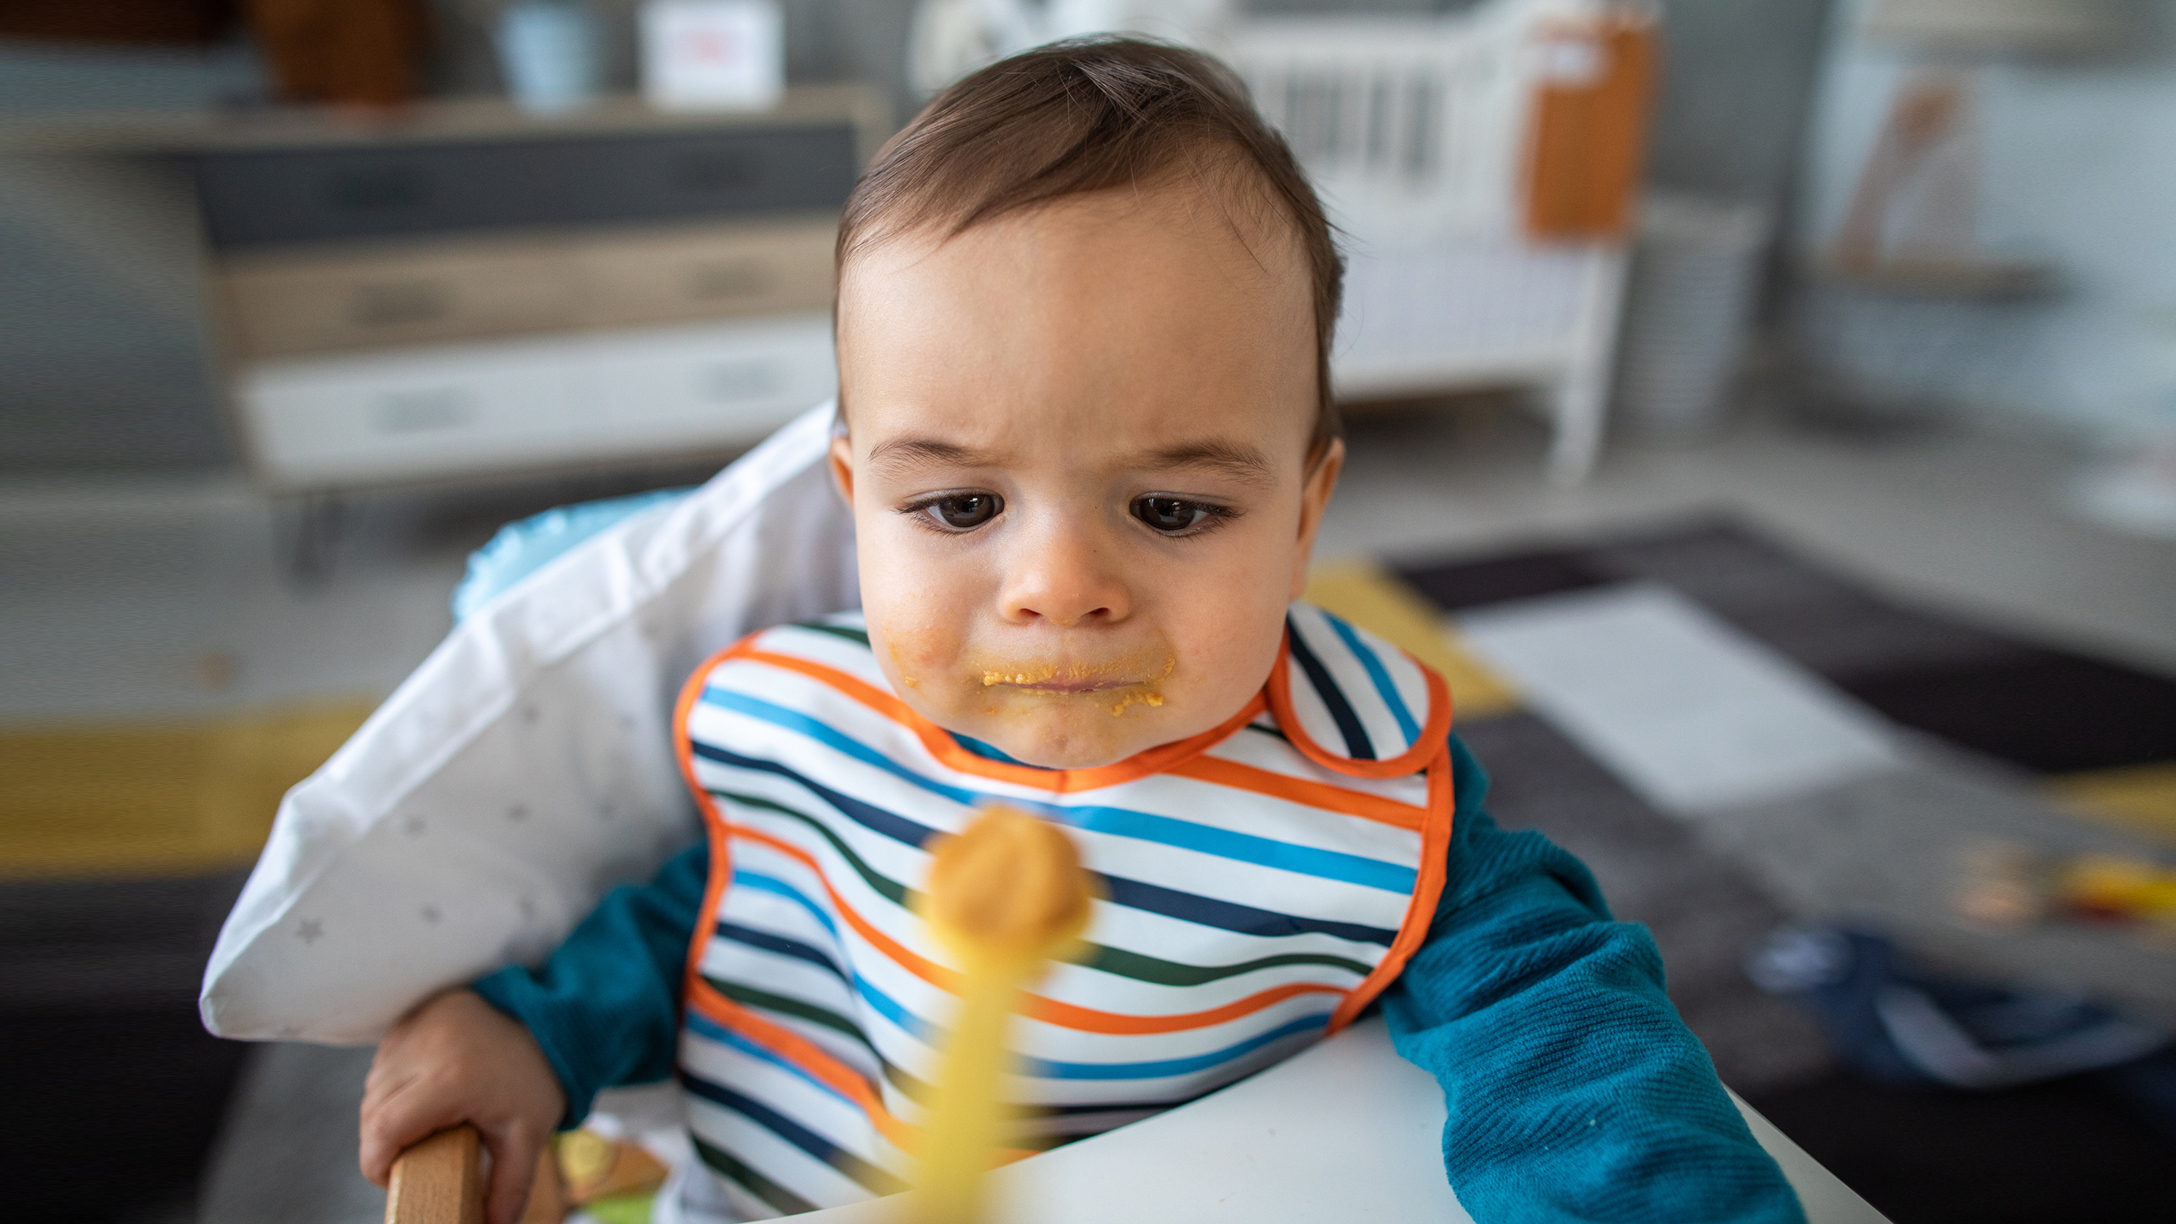 Baby won't eat solids: proven tips to get them more interested in food - My  Little Eater